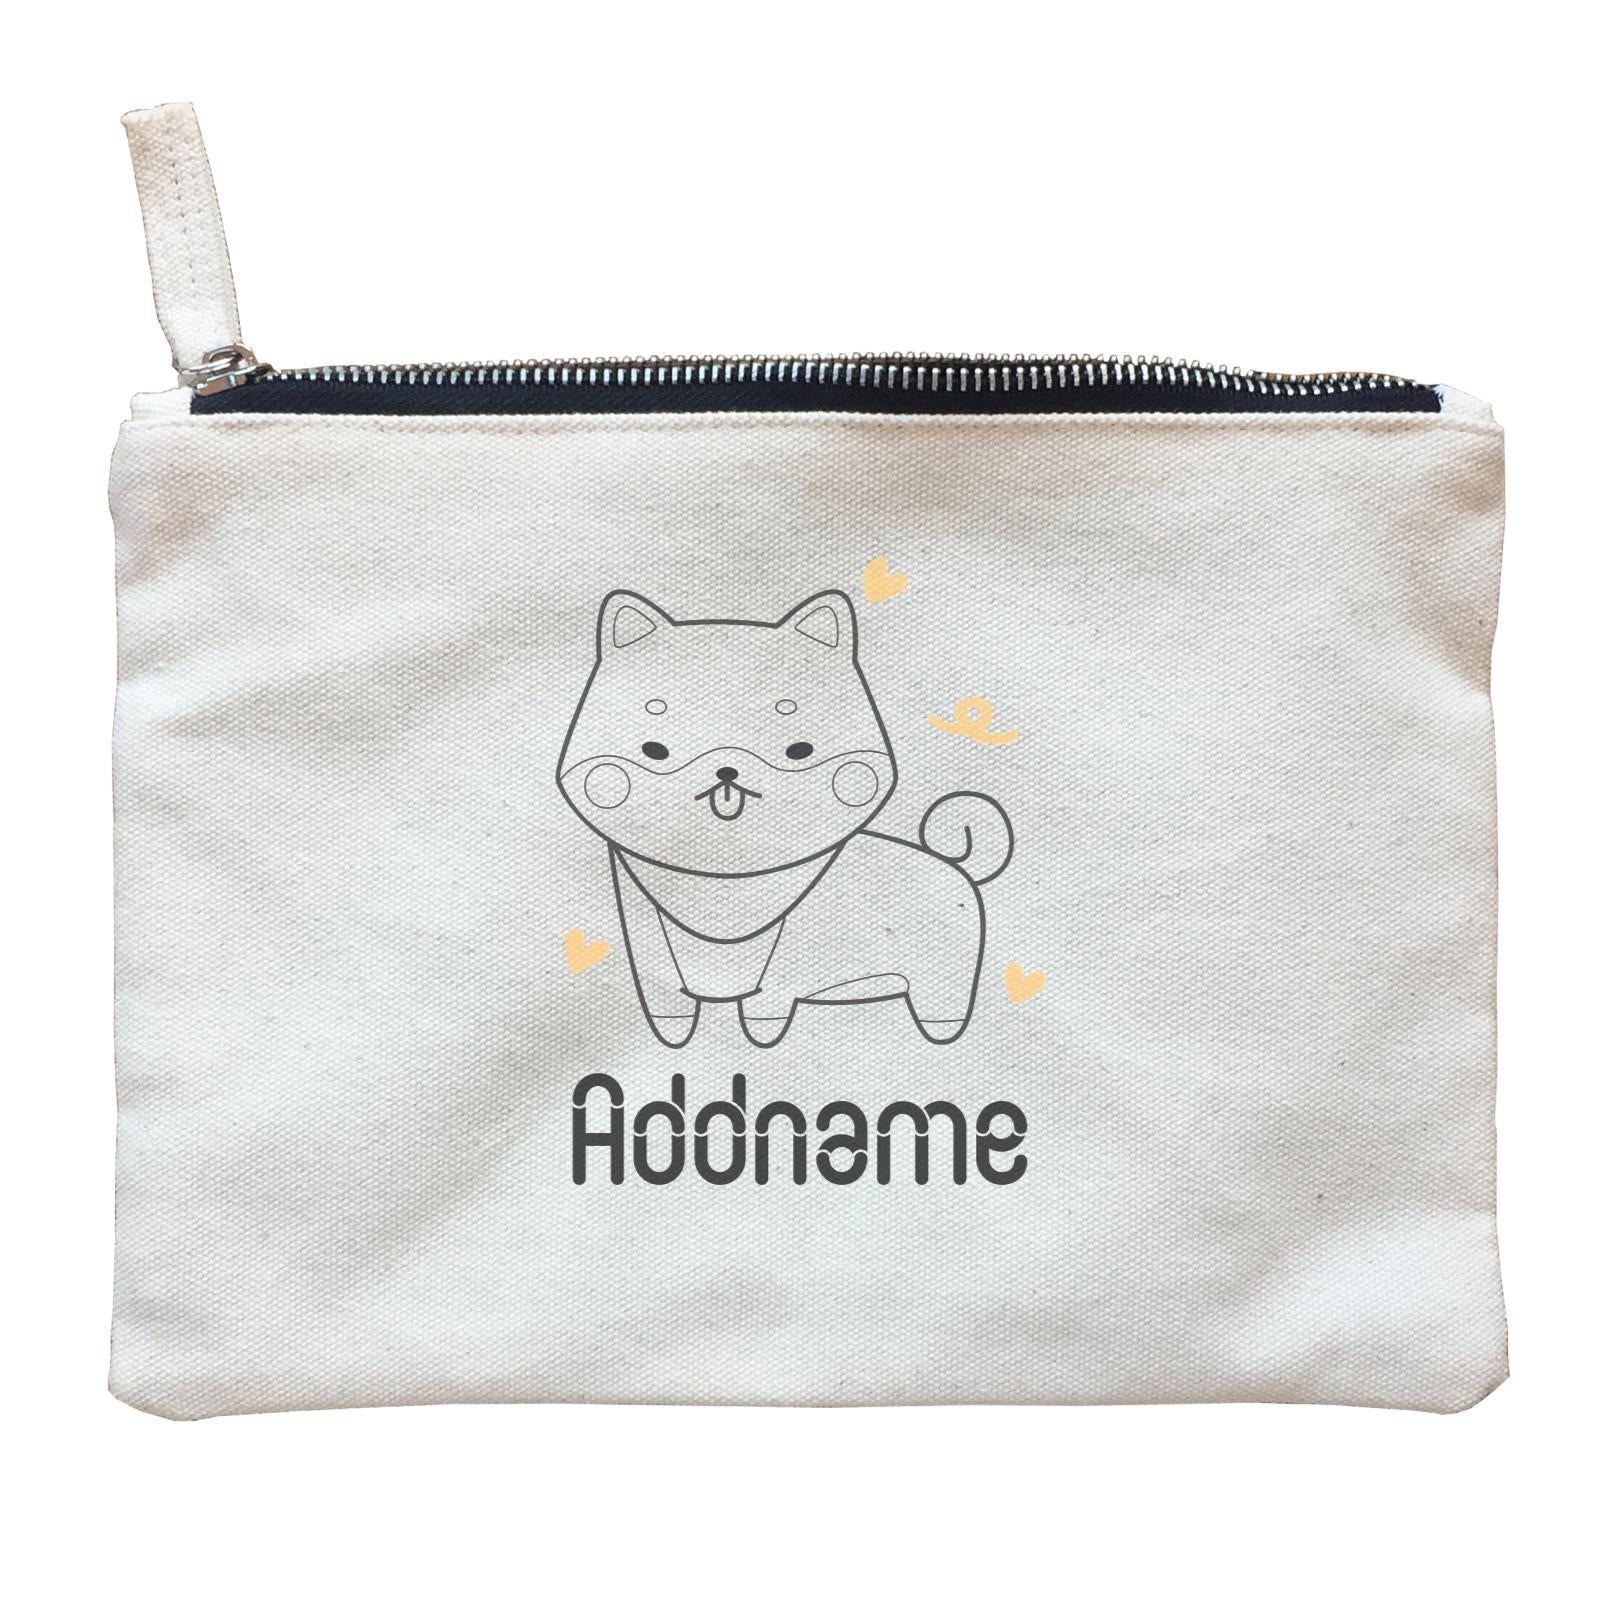 Coloring Outline Cute Hand Drawn Animals Dogs Shiba Addname Zipper Pouch